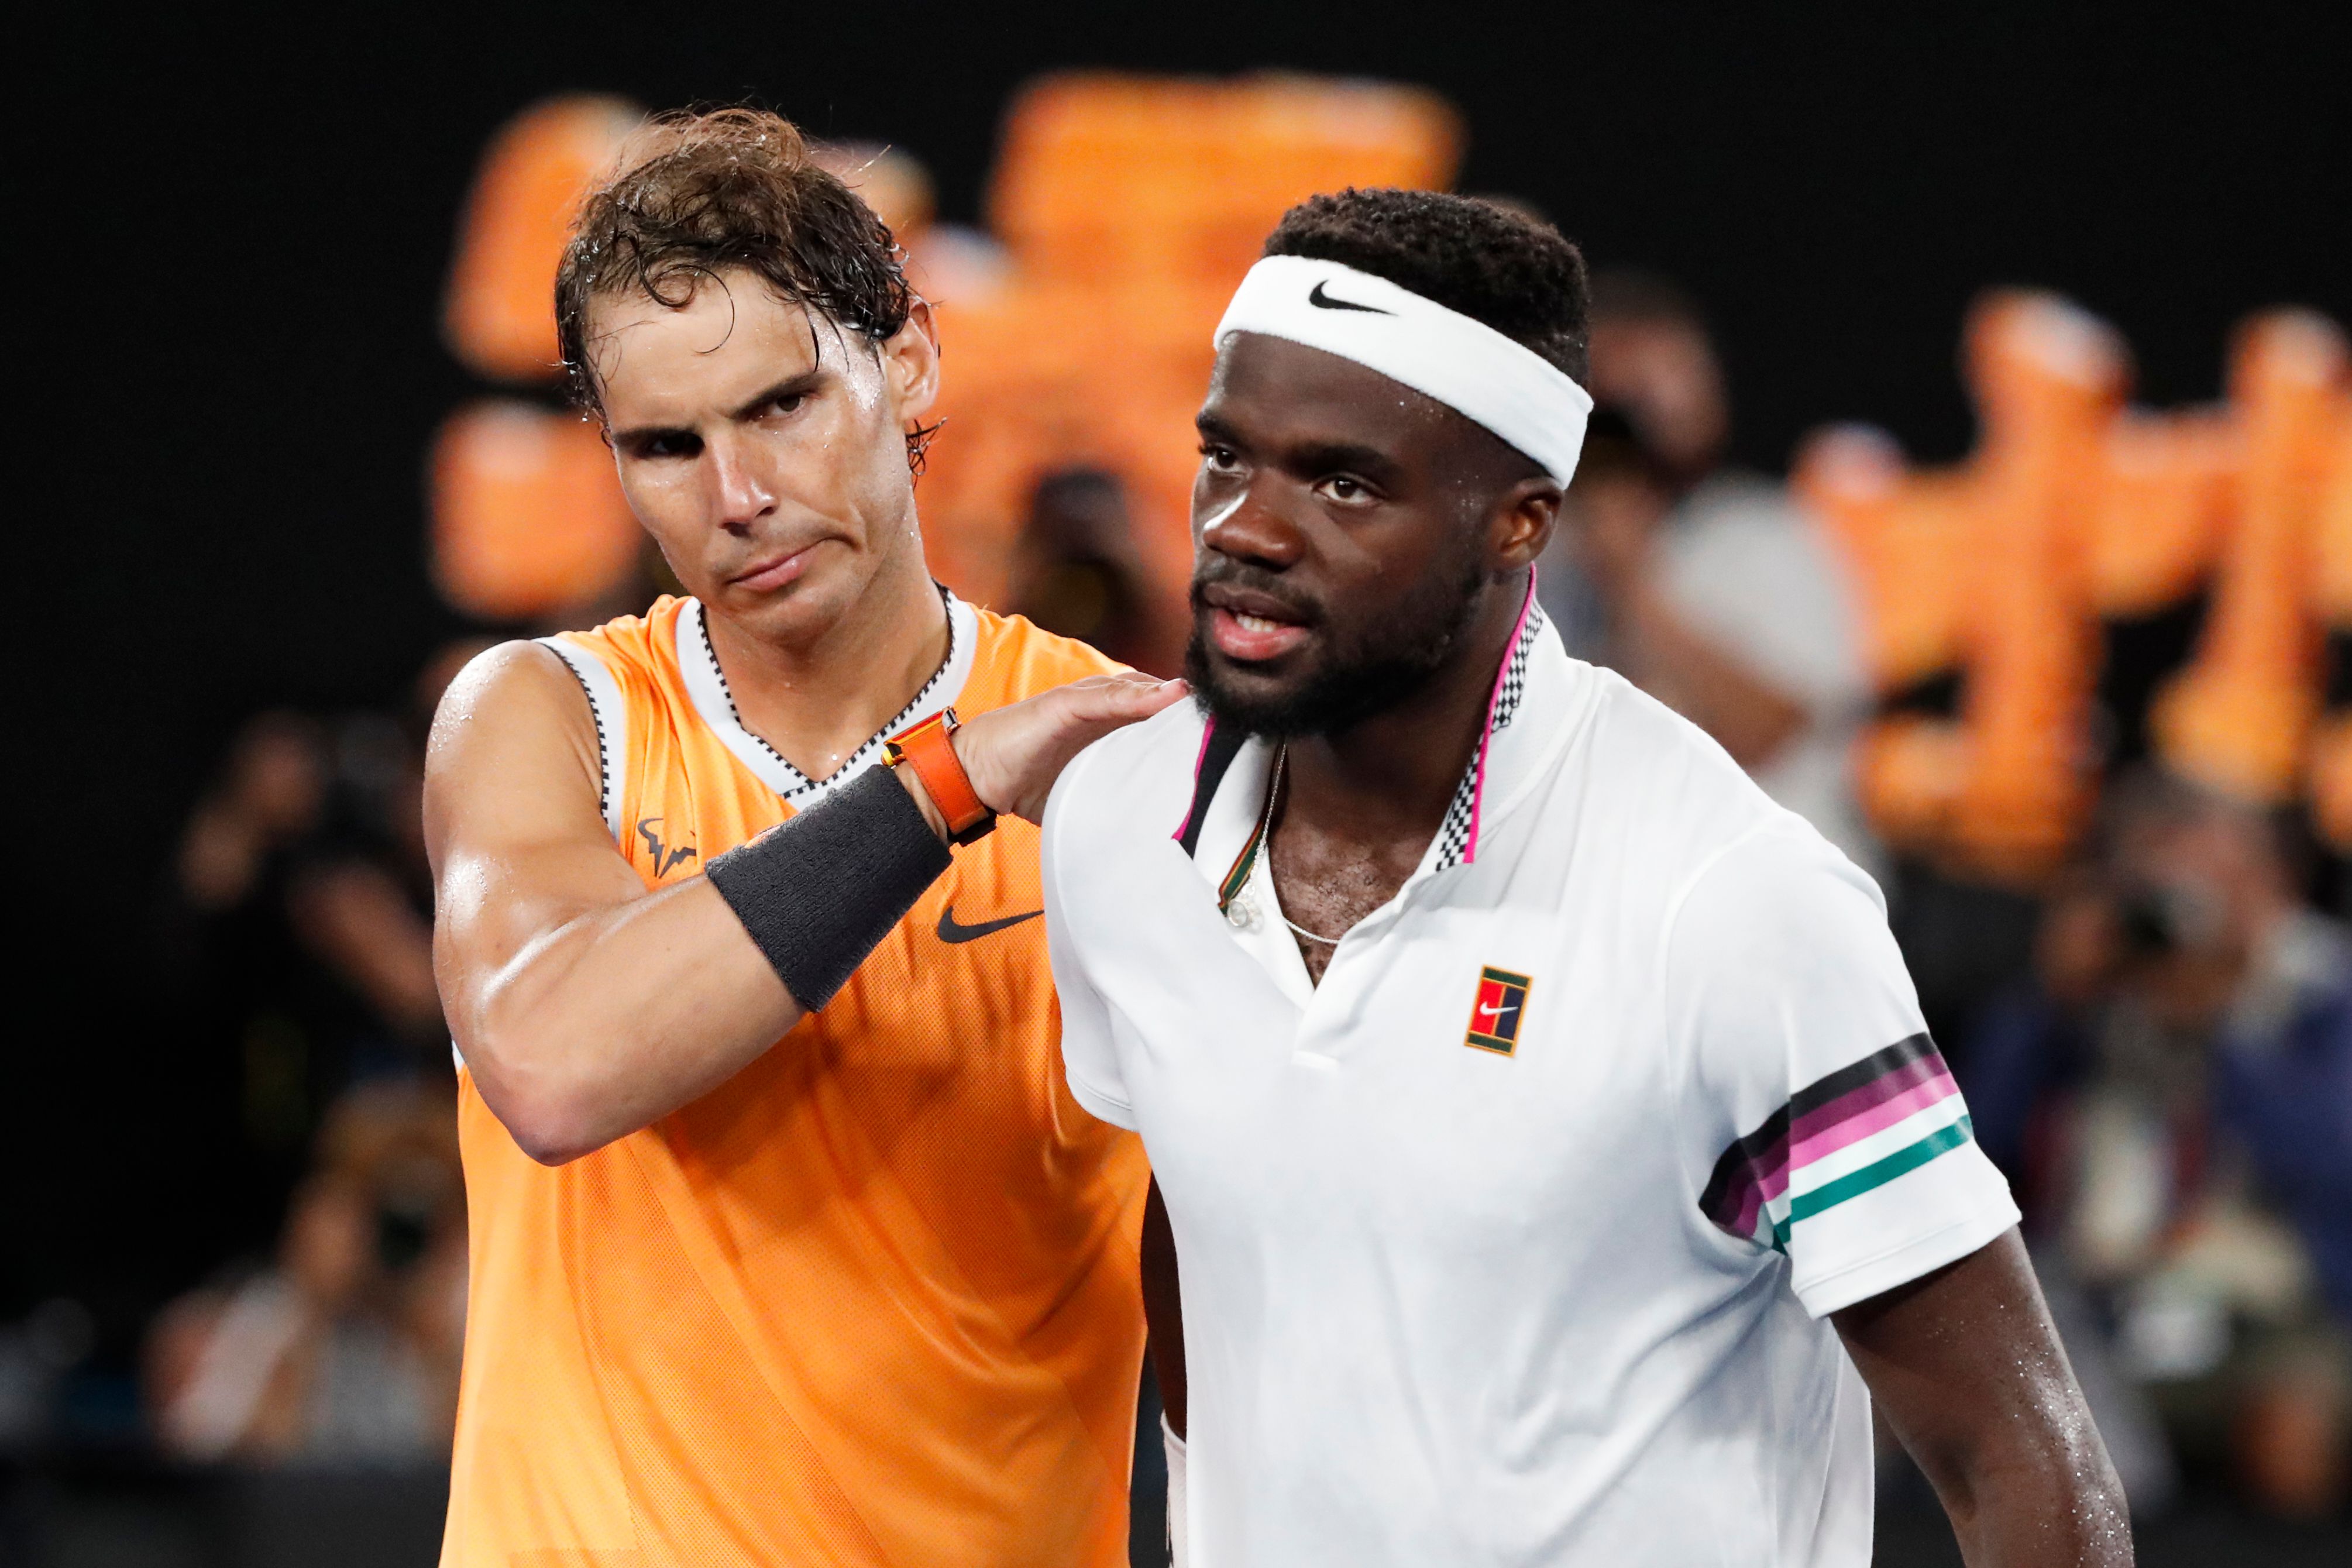 For Frances Tiafoe, a hard lesson learned in QF loss to Rafael Nadal